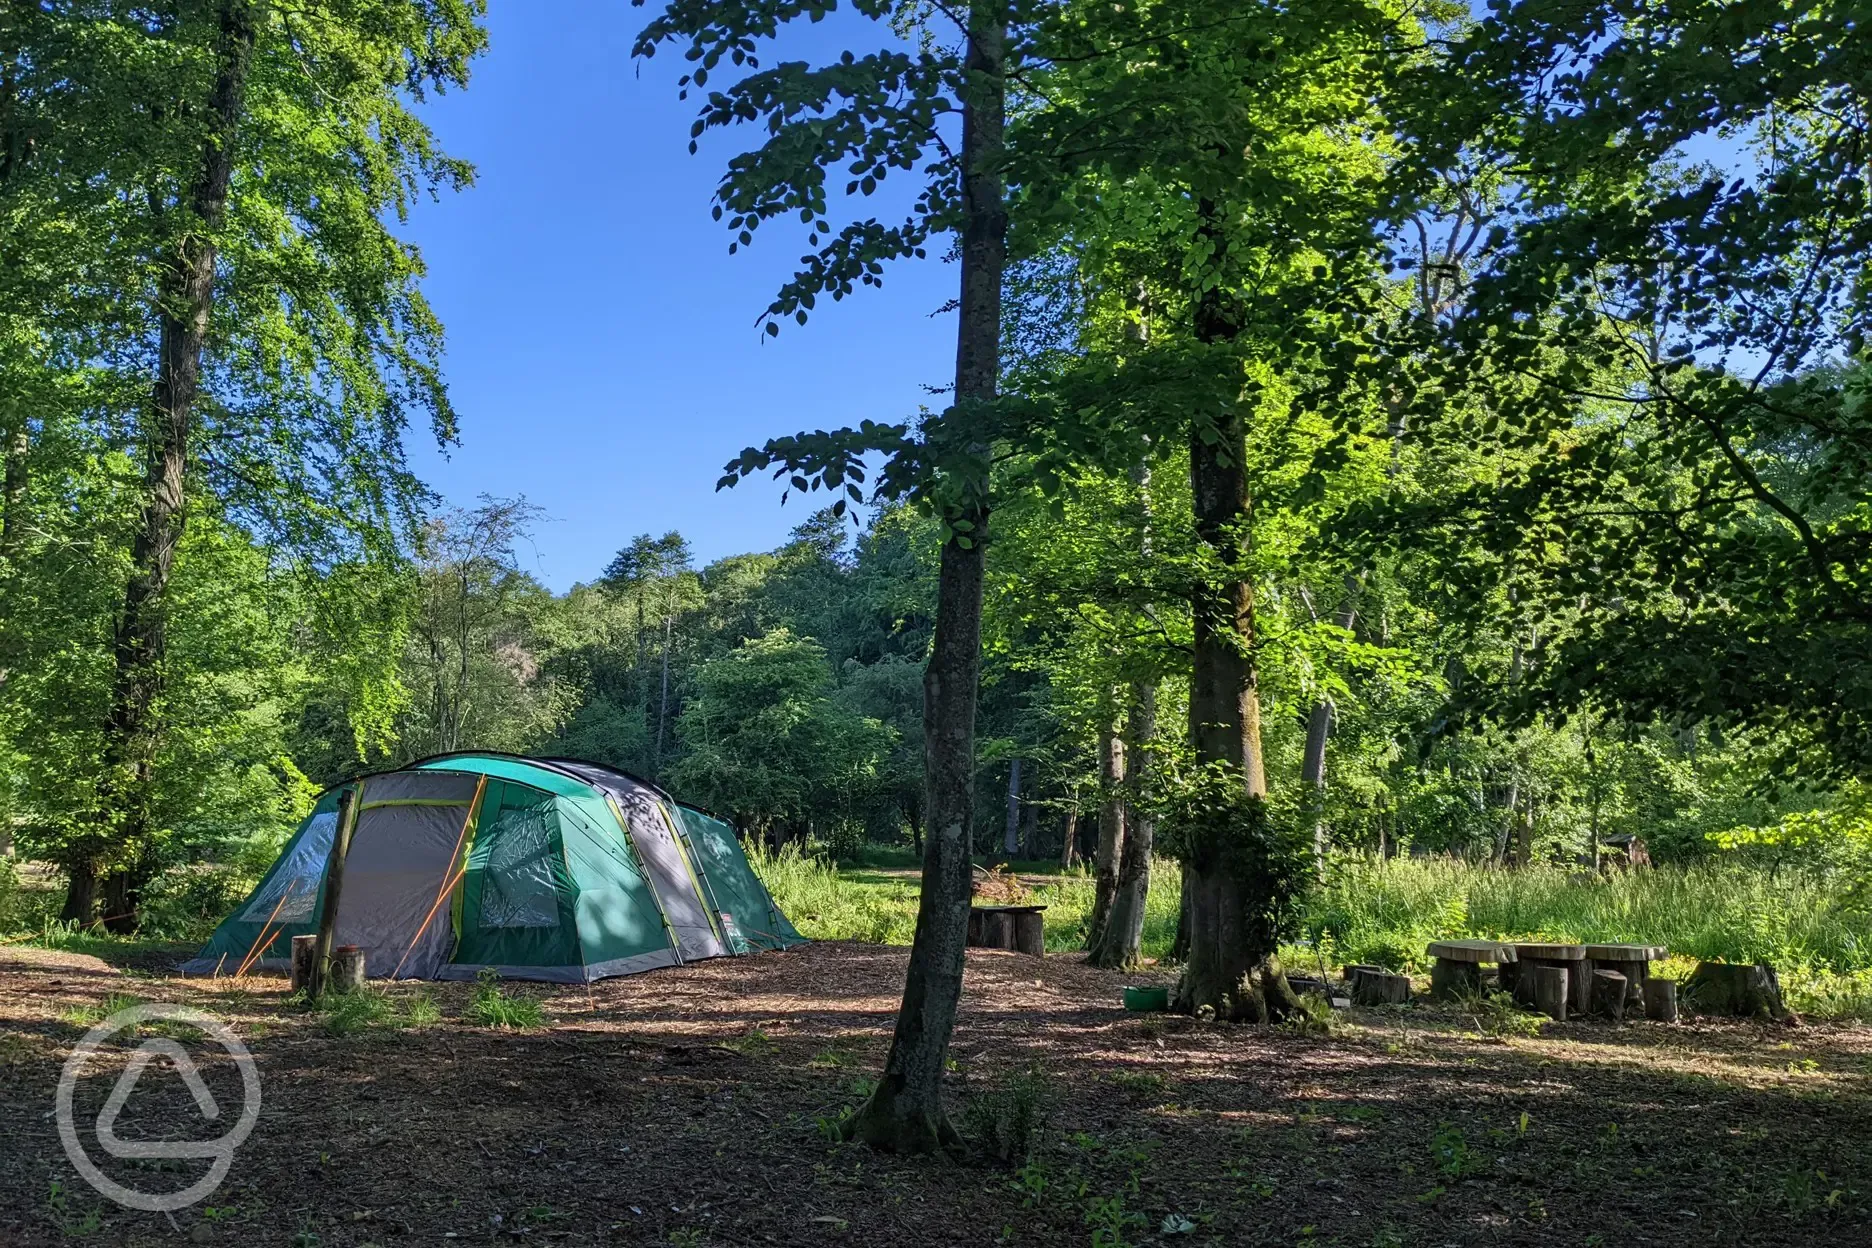 Camp under the trees